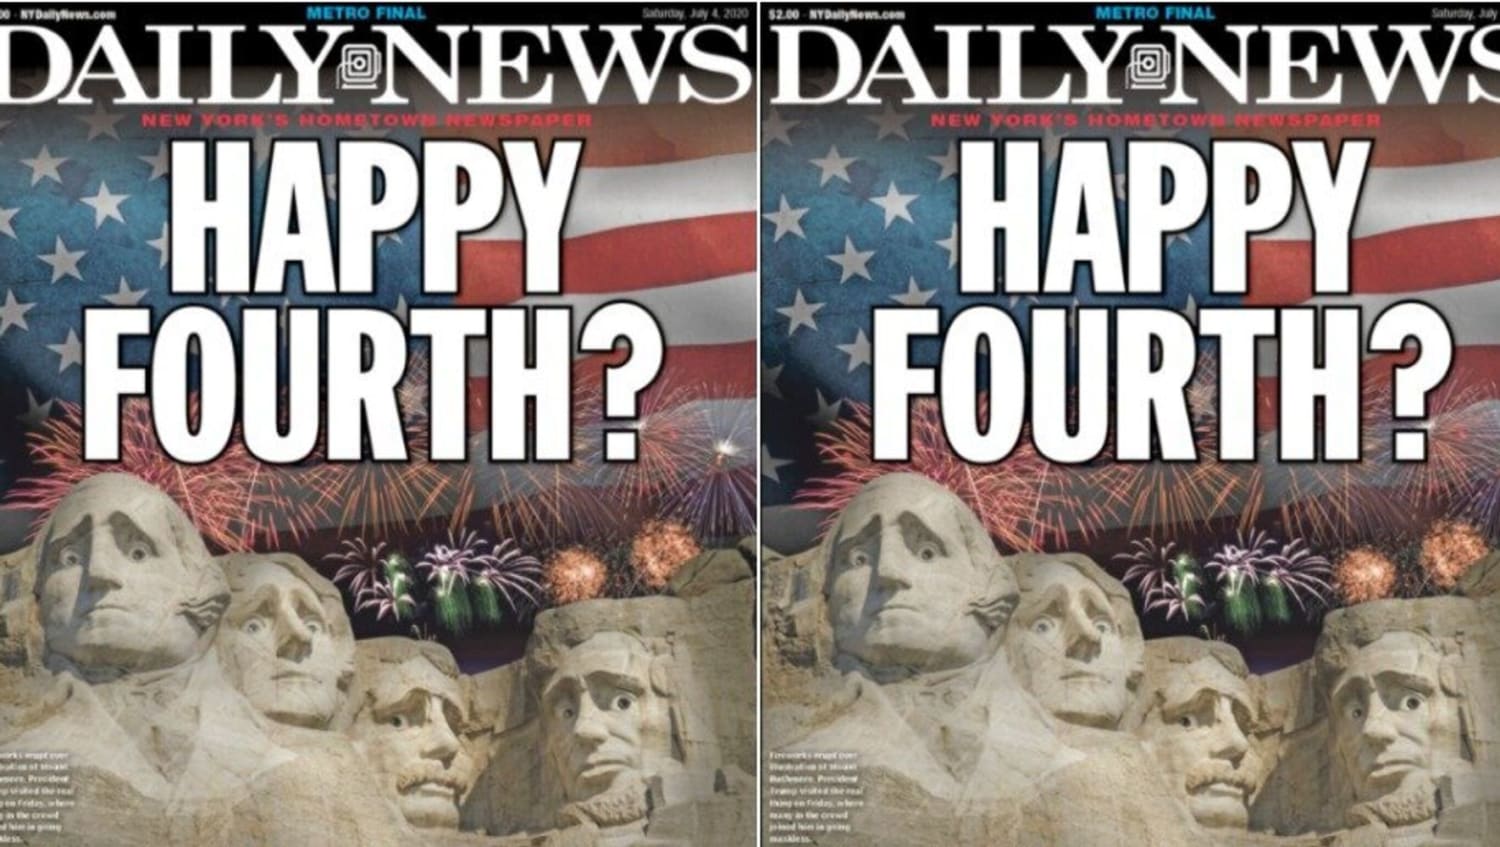 Presidents Of Mount Rushmore Look Highly Concerned On New York Daily News Cover